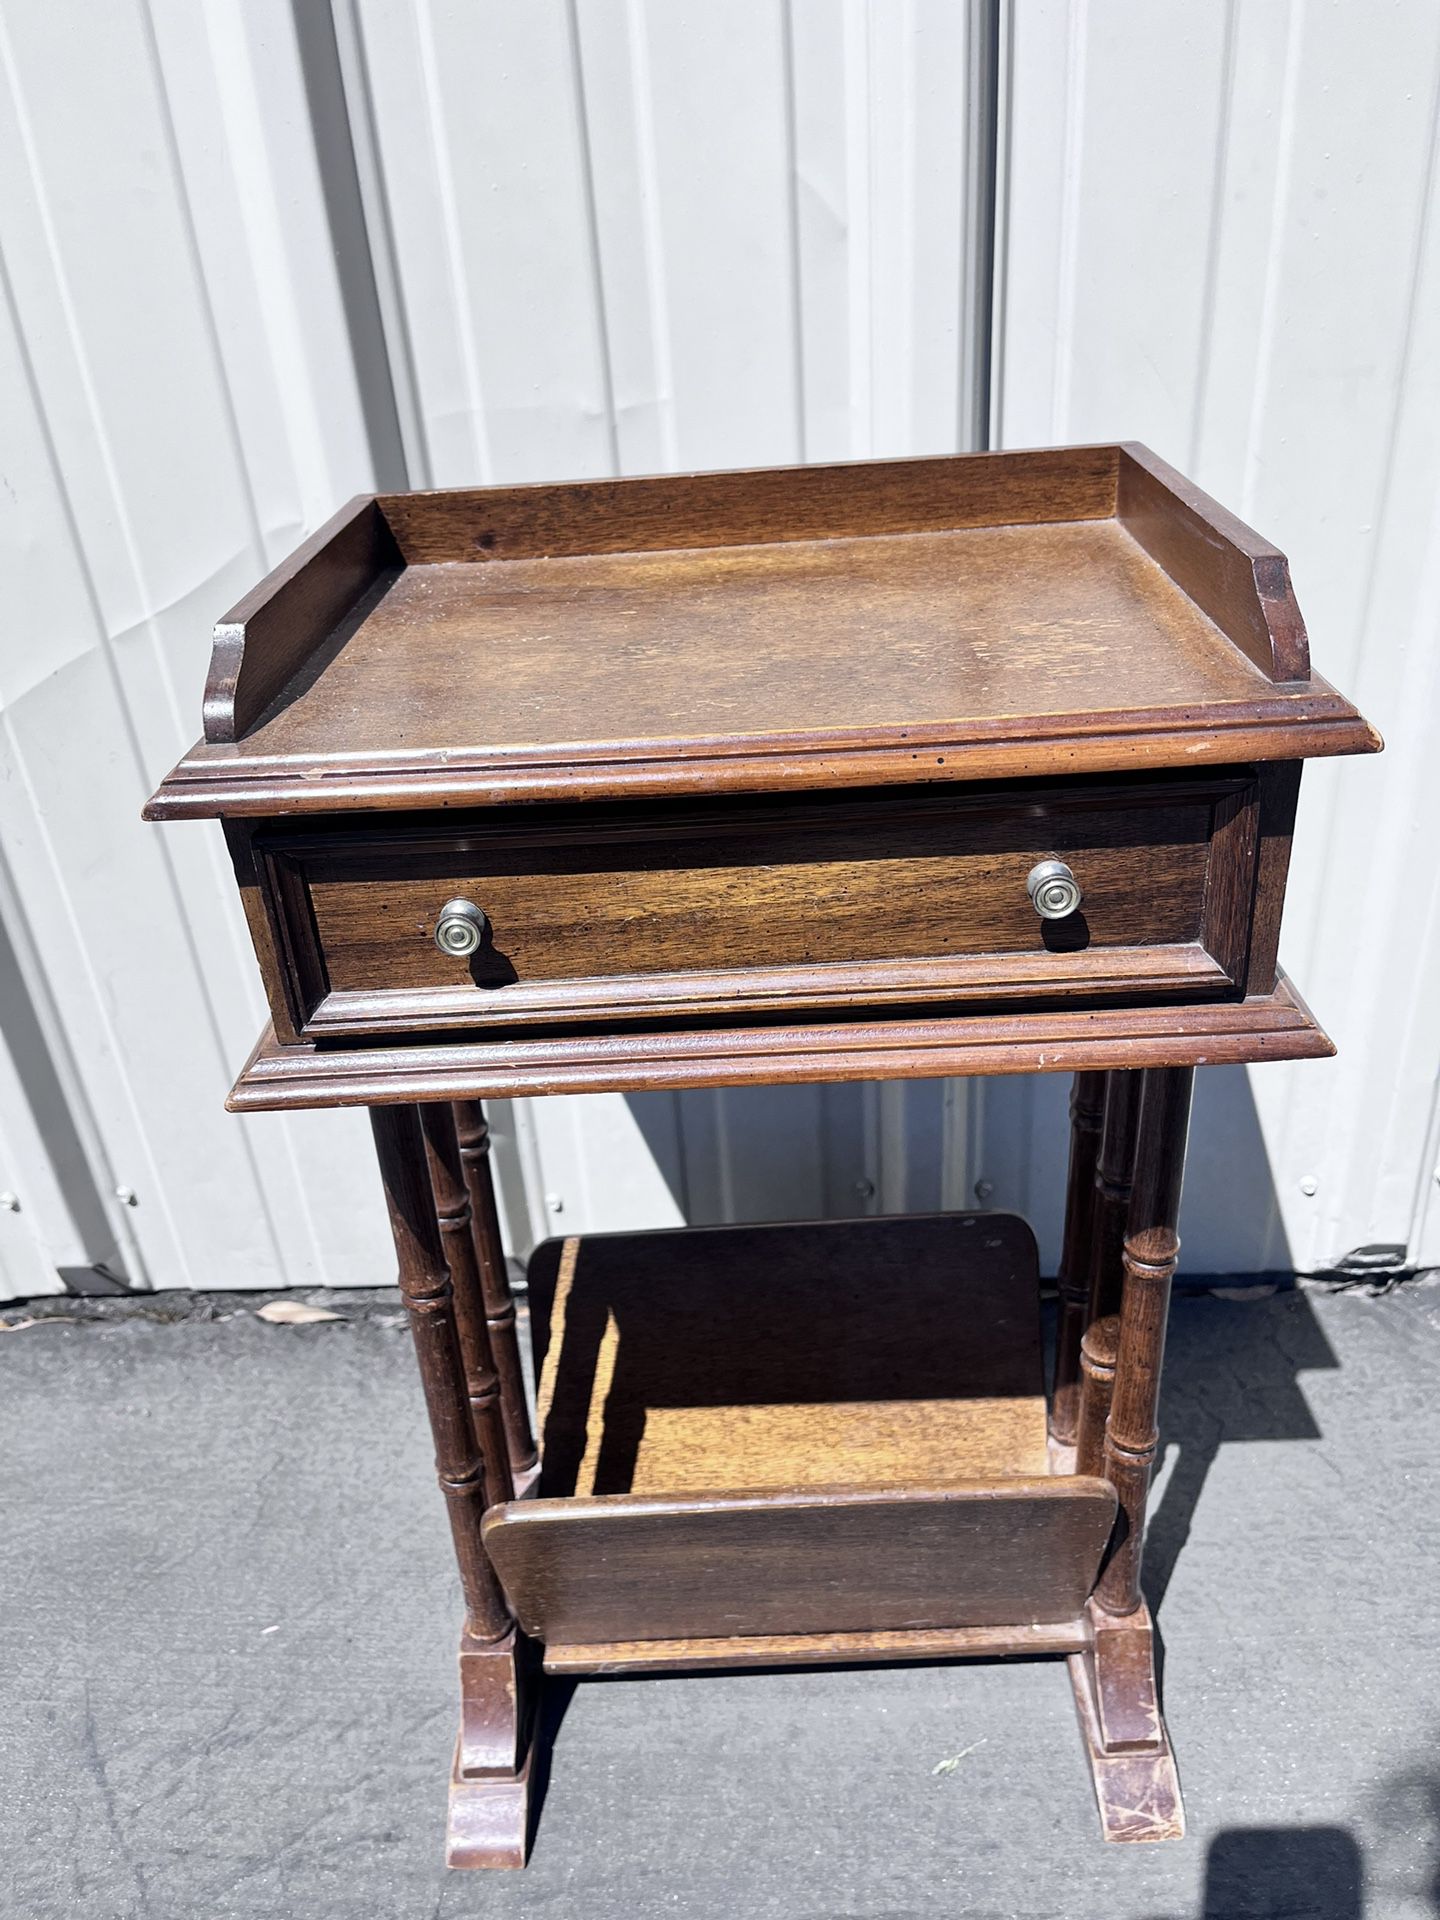 VINTAGE WOODEN TELEPHONE TABLE WITH PHONE BOOK RACK BRANDT FURNITURE COMPANY